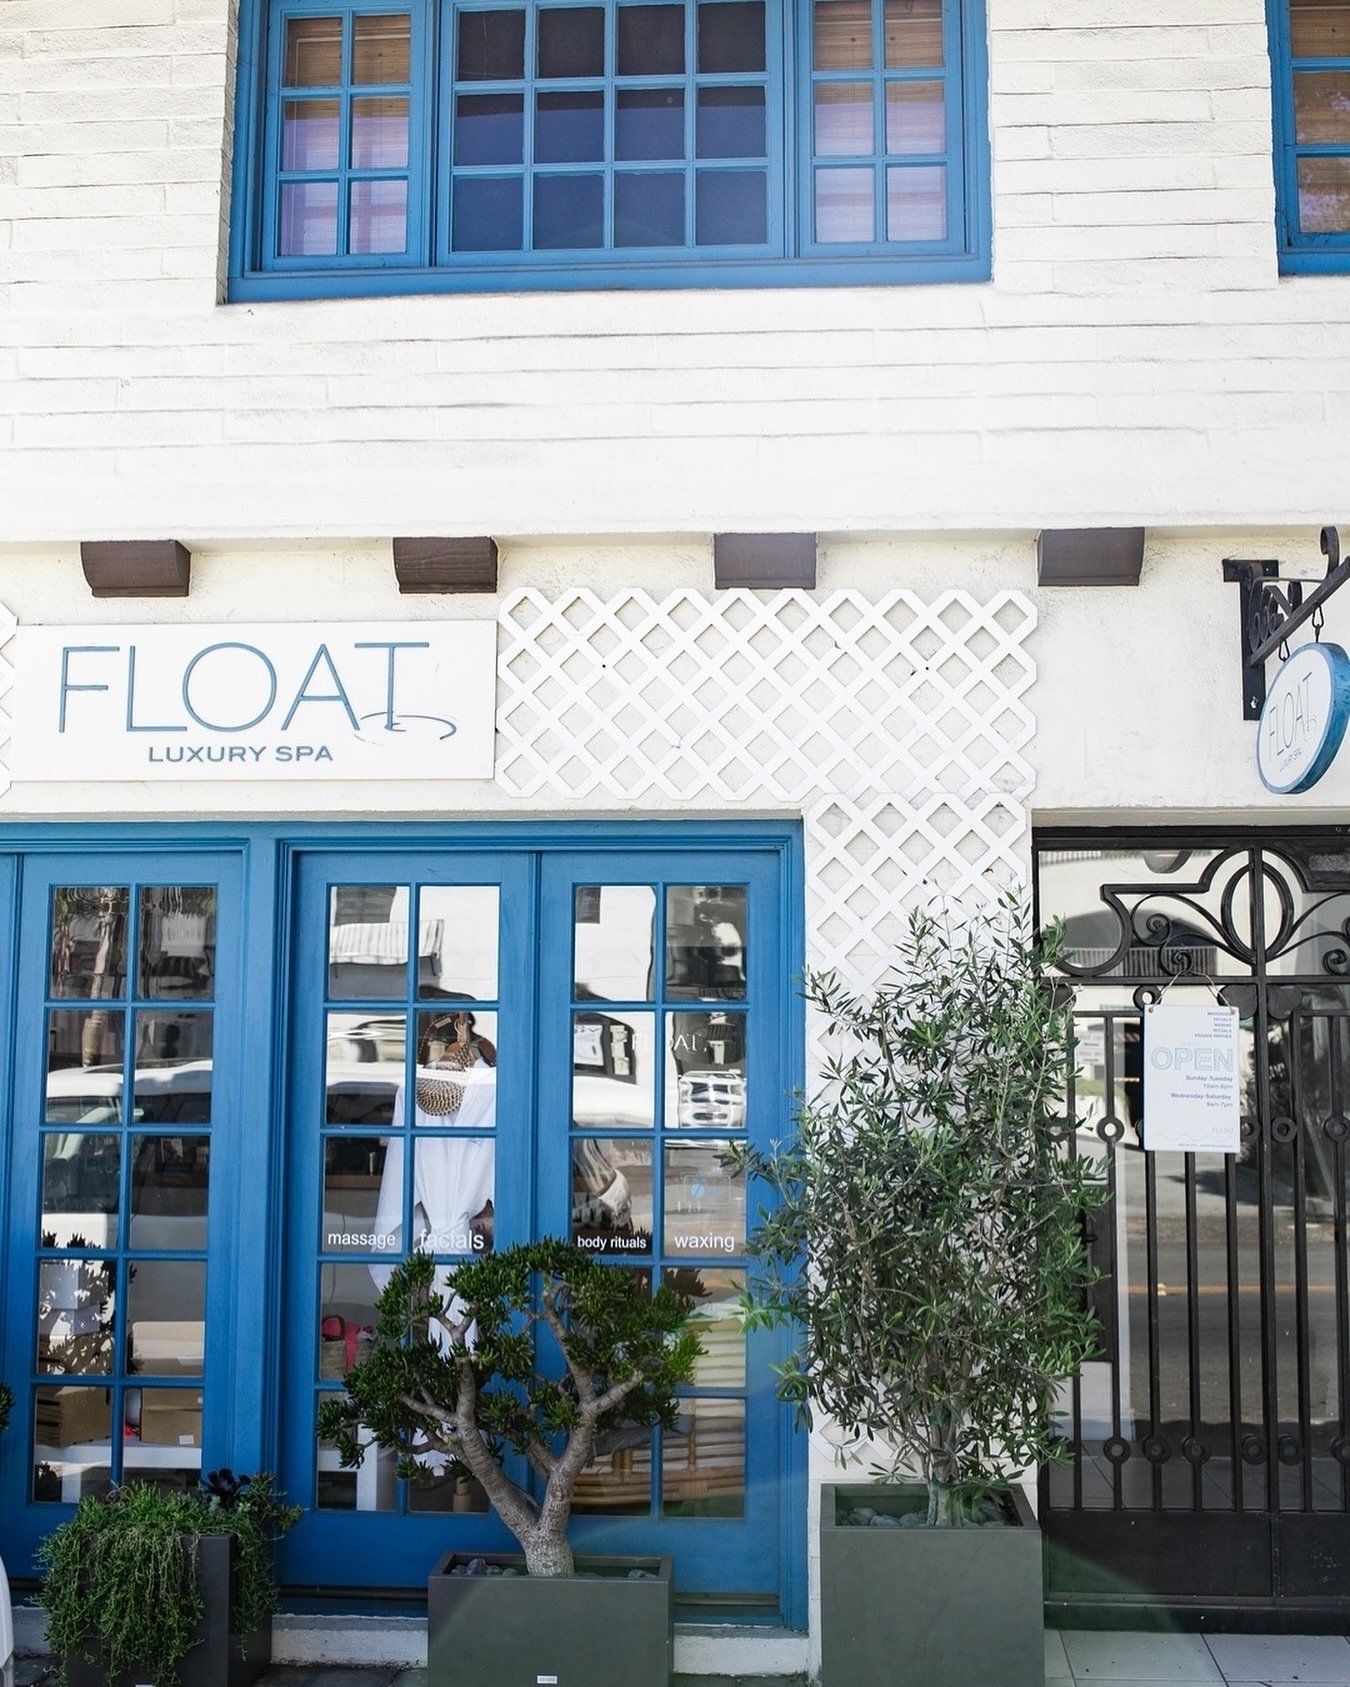 Celebrate Teacher Appreciation Week with us! Treat those special educators in your life to a custom facial or specialty massage with a Float Luxury Spa gift card.  Swing by our spa + boutique or snag one online. We are open until 6 PM today. 
#FloatL